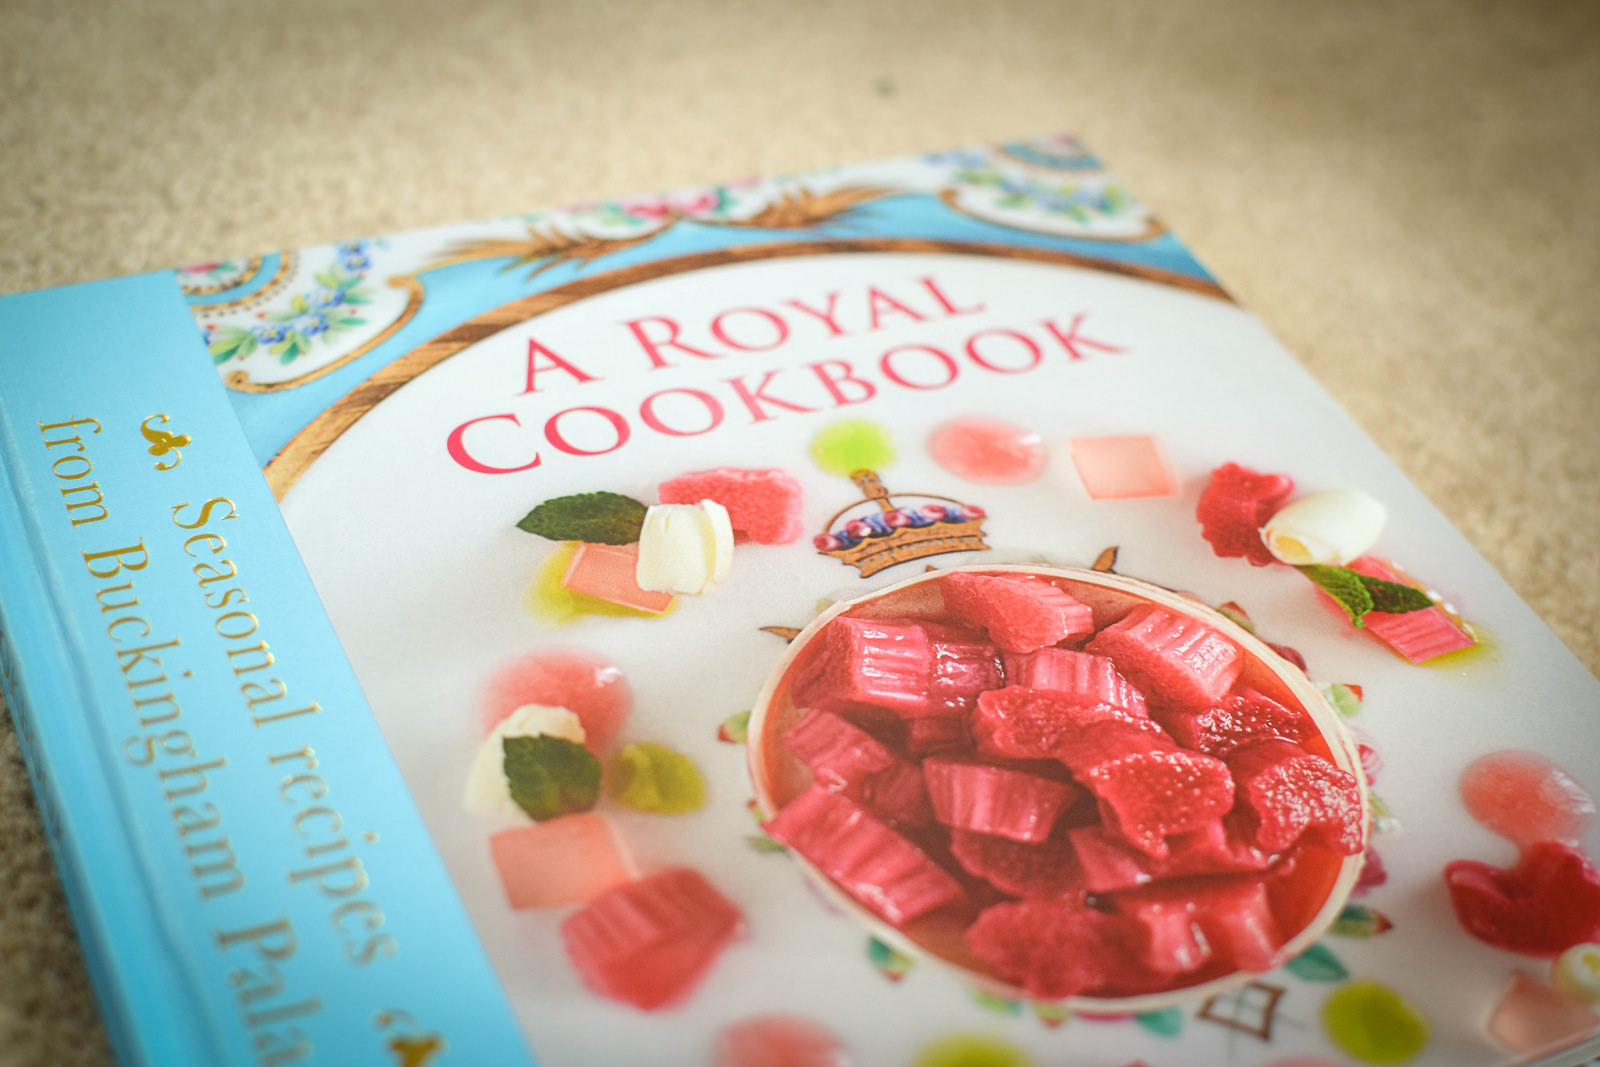 A Royal Cookbook, buckingham palace, the queen, royal food